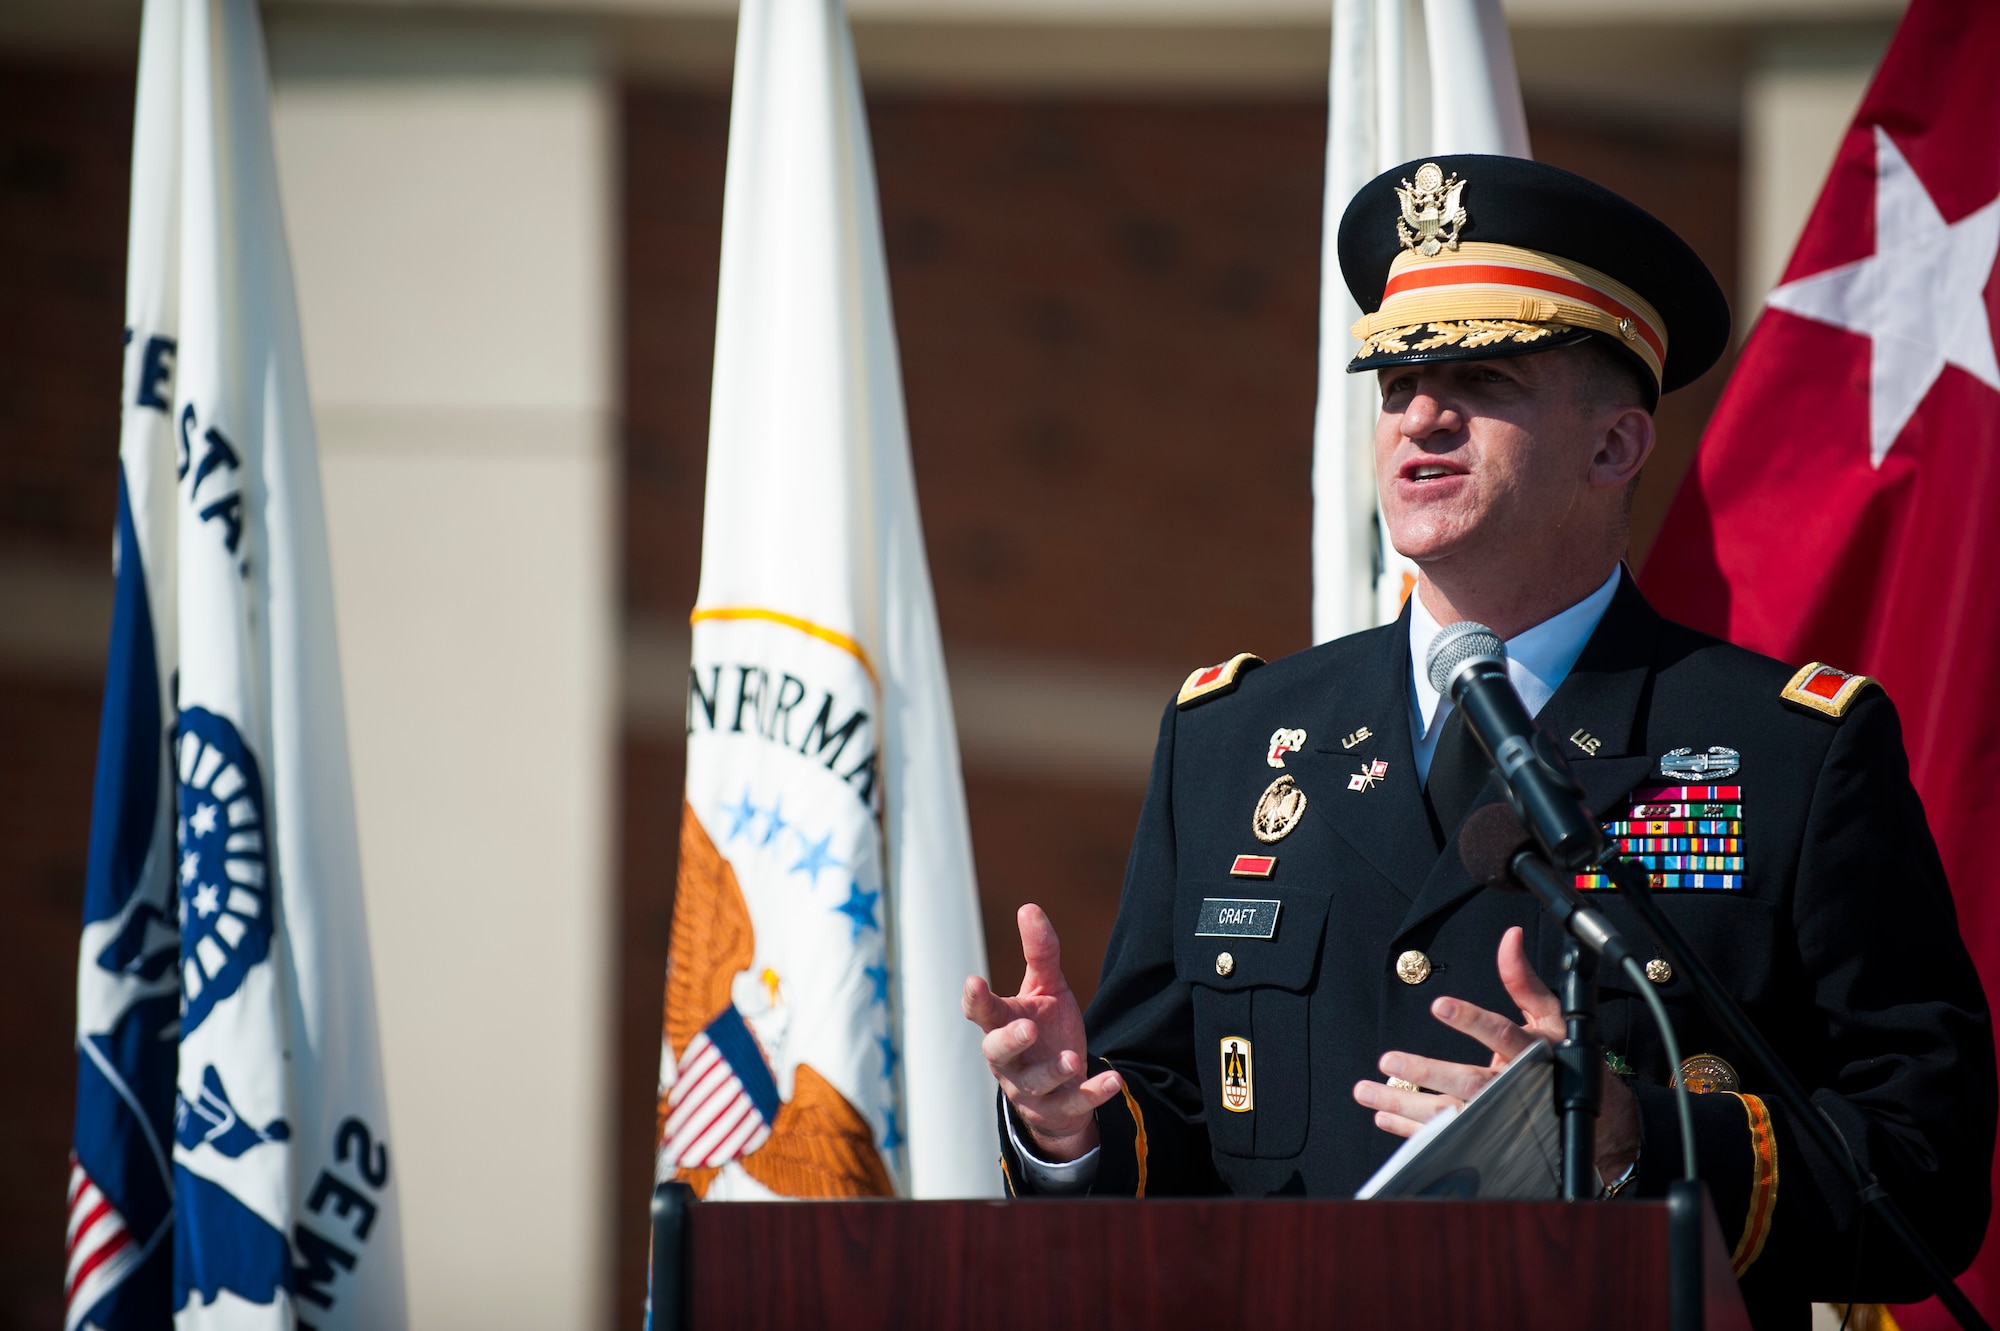 U.S. Army Col. Paul Craft, Defense Information Systems Agency Global Operations Command commander, delivers a speech during a ribbon cutting ceremony for the new DISA compound at Scott Air Force Base, Ill., Aug. 11, 2016. DISA Global is the nation's premier cyber protection division and executes global mission support and emergency response coordination. (U.S. Air Force photo by Staff Sgt. Clayton Lenhardt/Released)